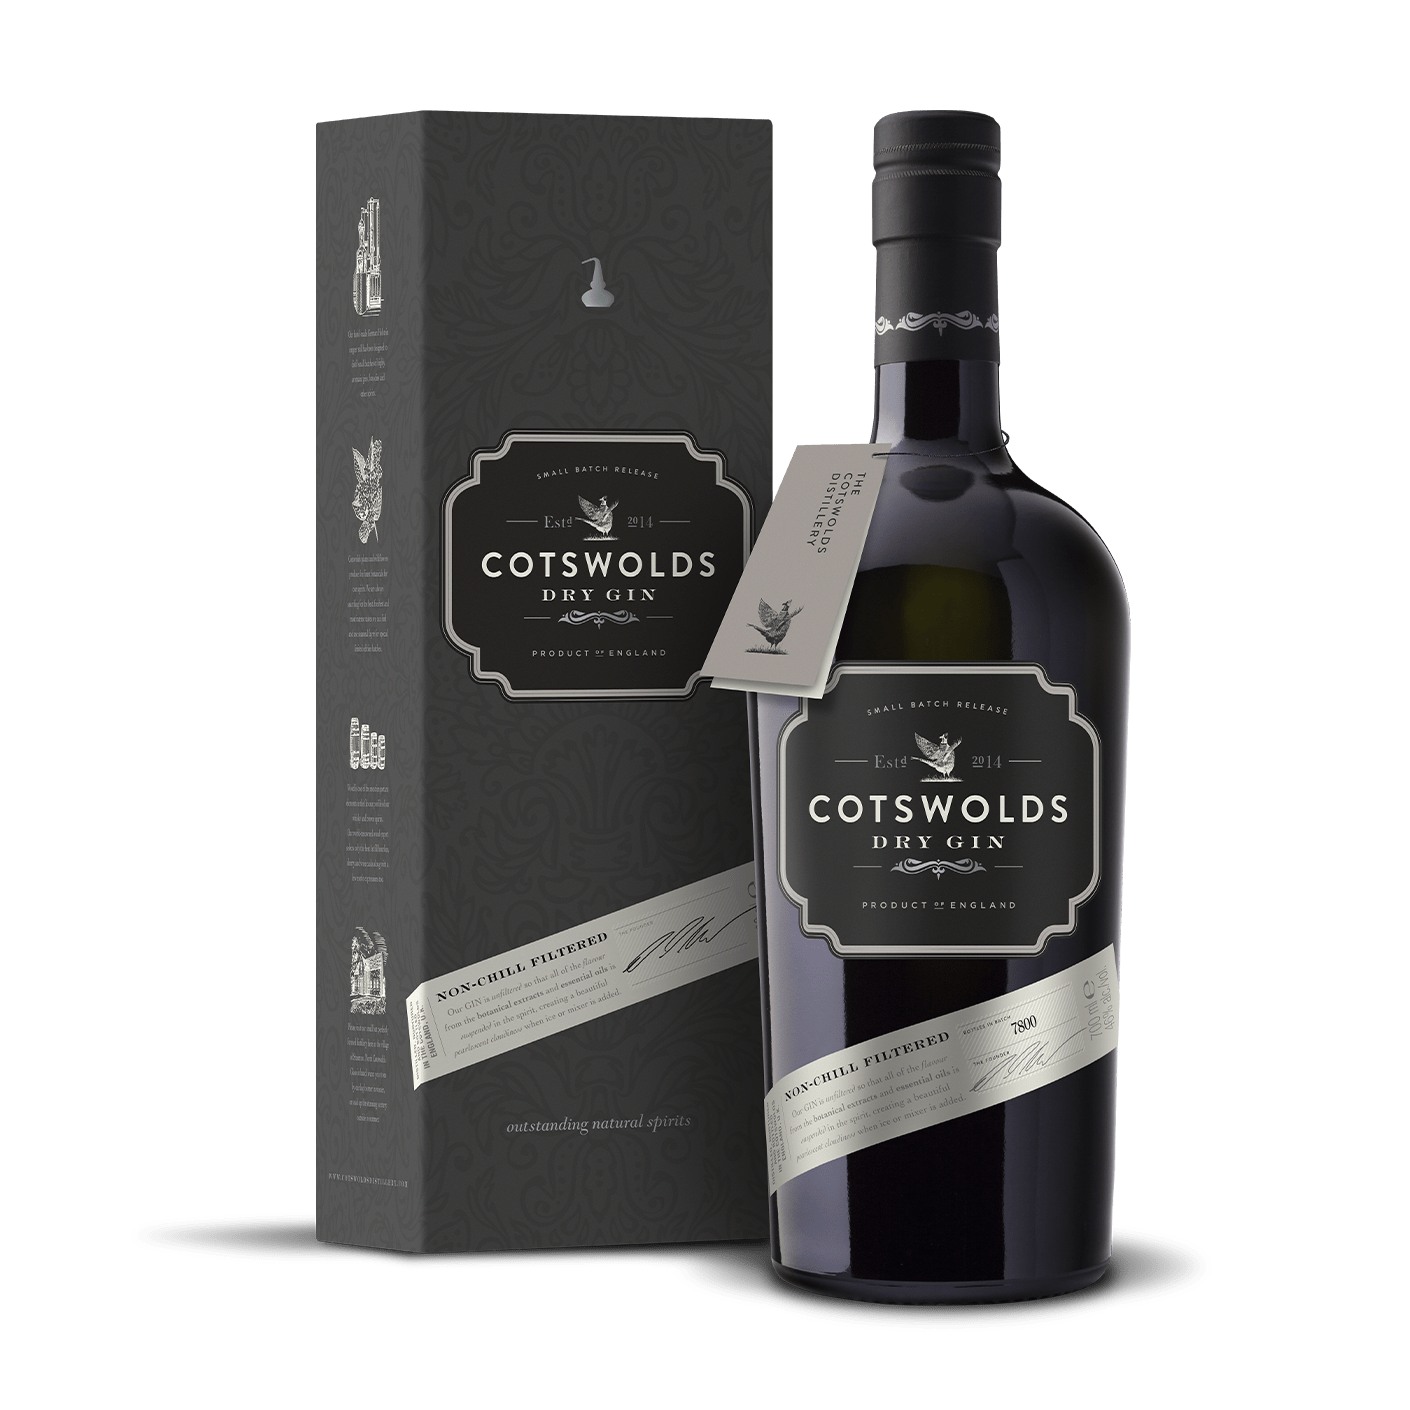 cotswolds dry gin bottle and gift box